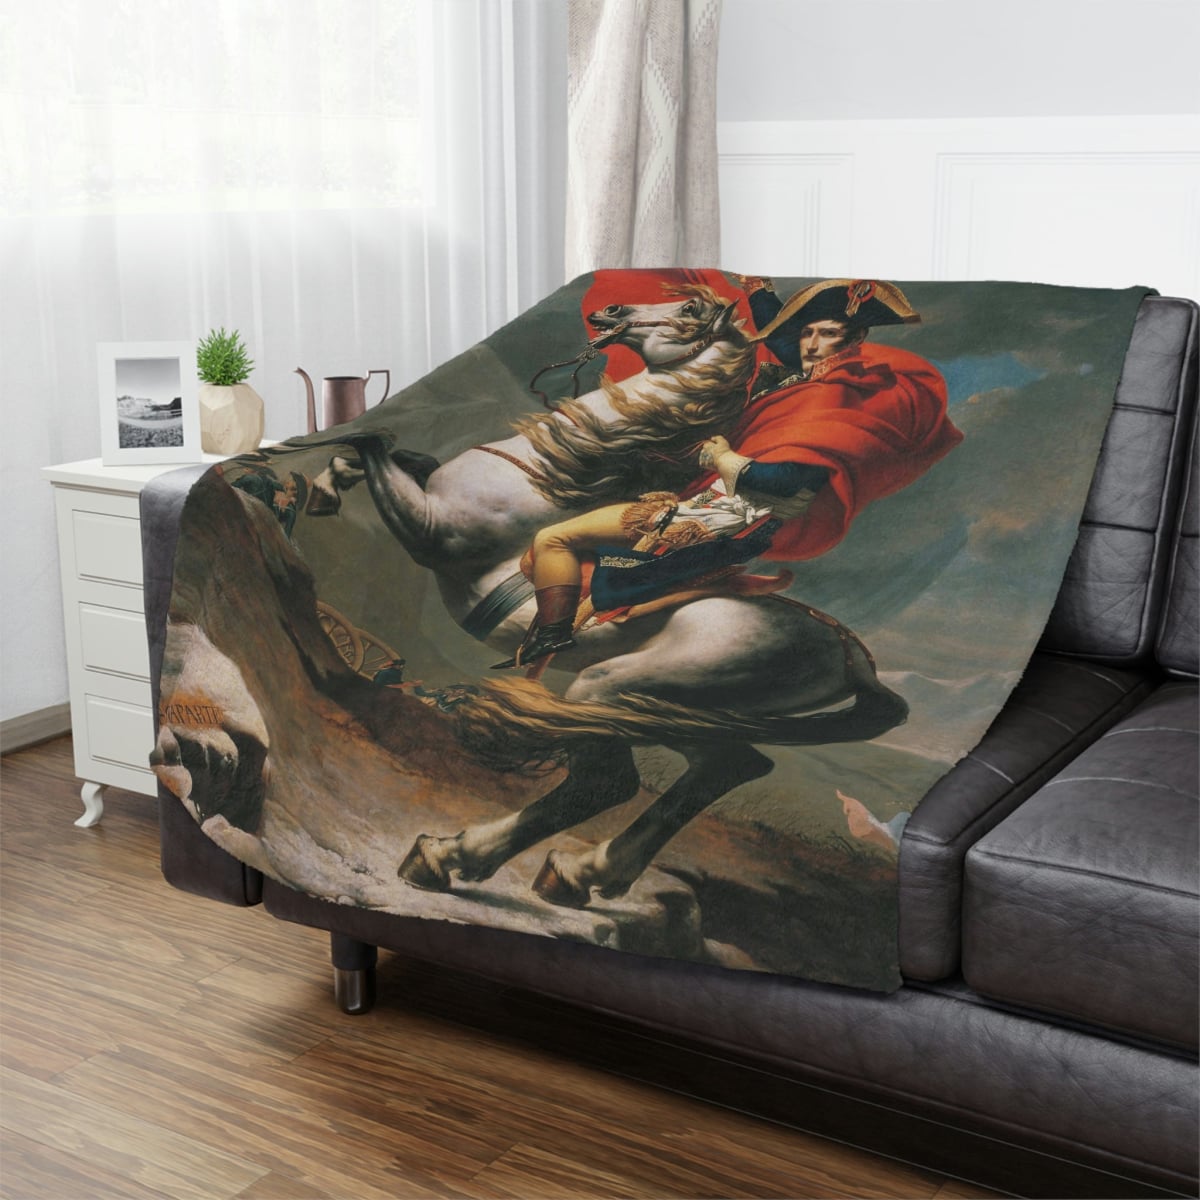 Napoleon Crossing the Alps Blanket by Jacques-Louis David